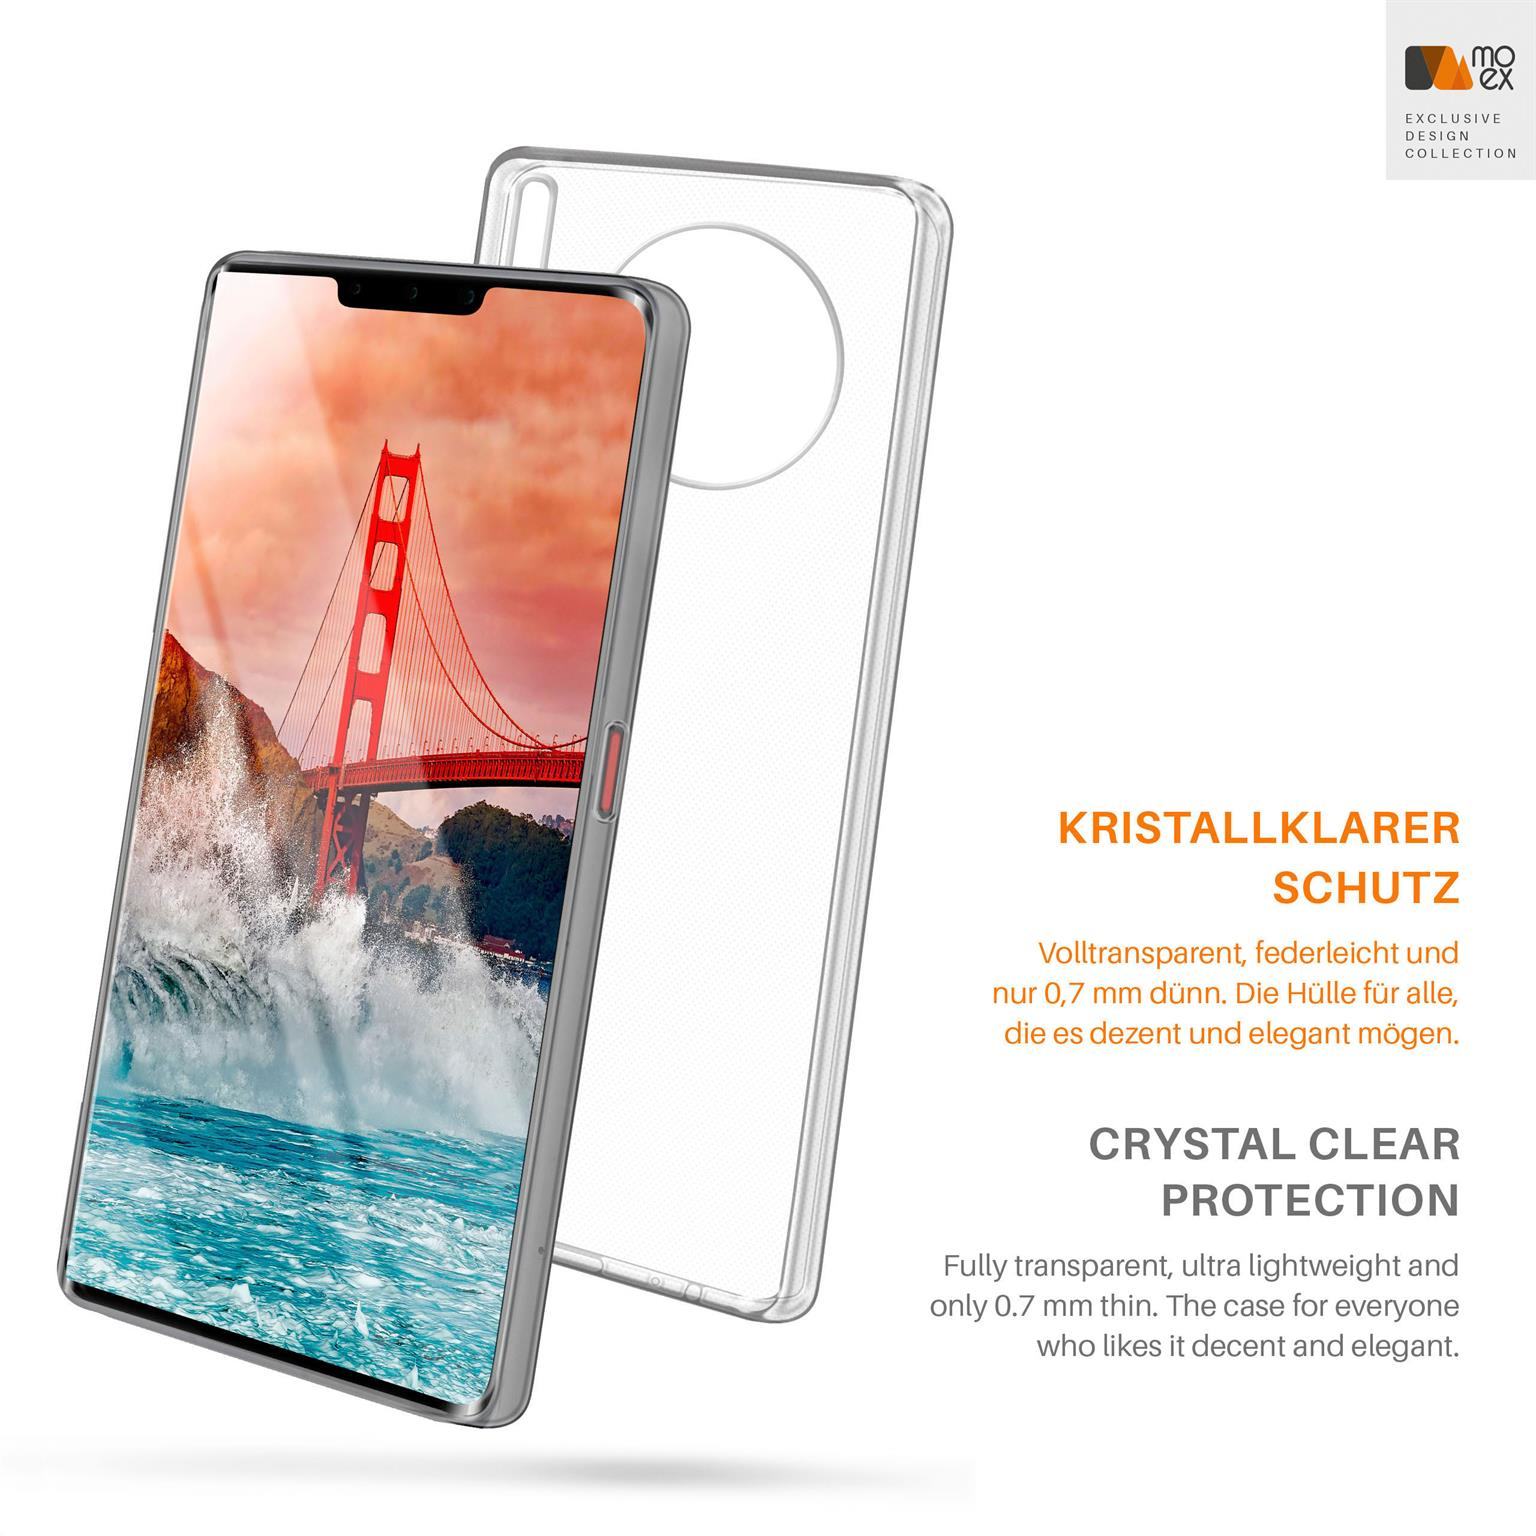 MOEX Aero Case, Backcover, Huawei, Pro, Crystal-Clear Mate 30